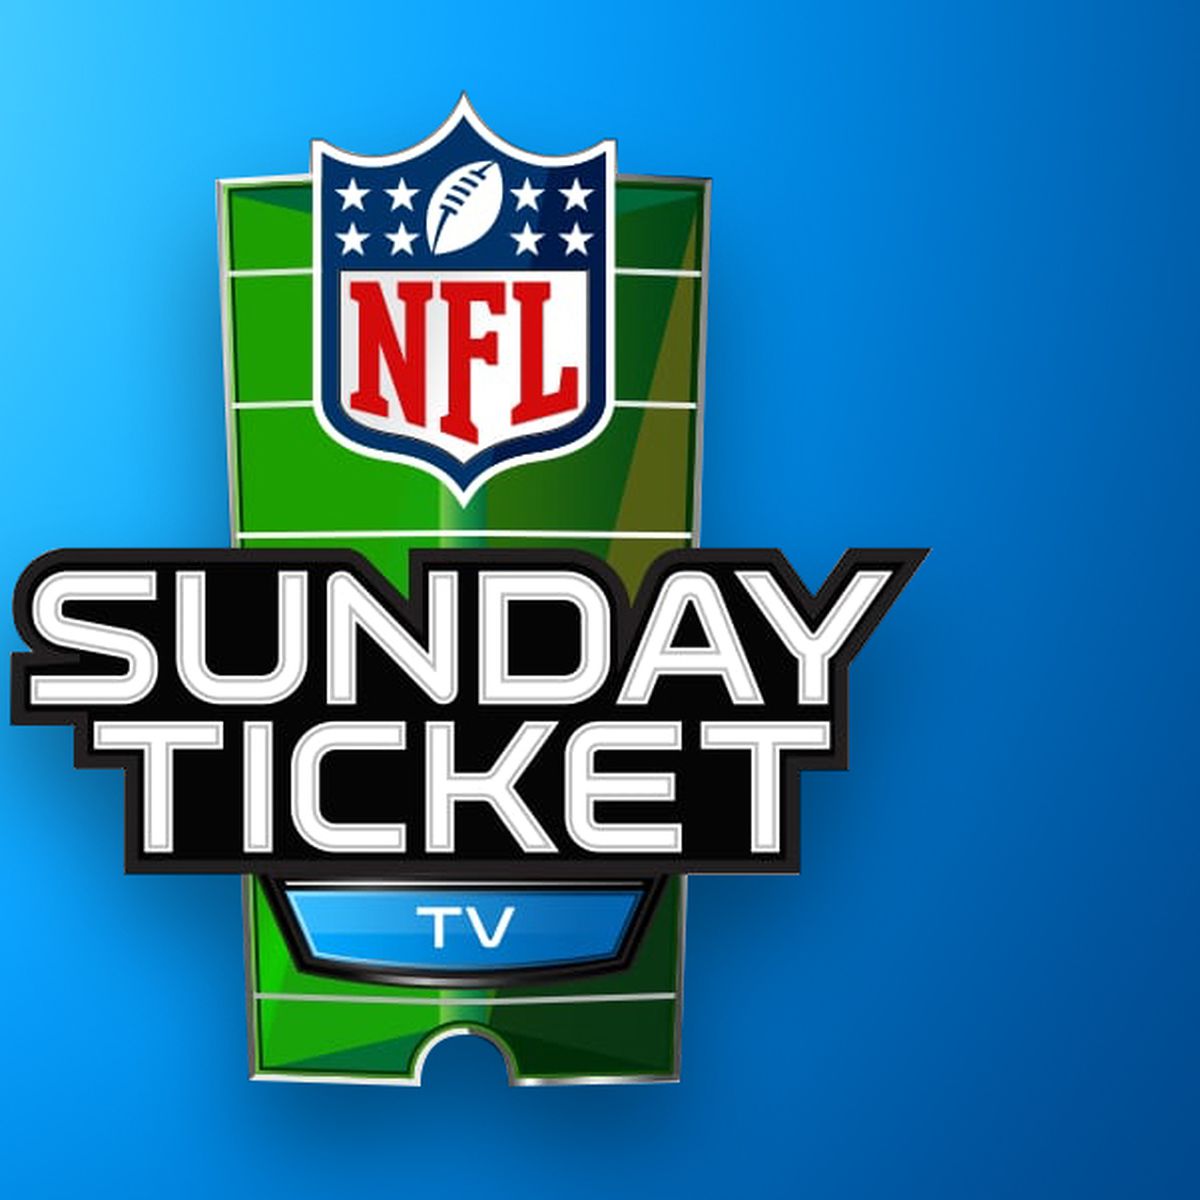 cost of nfl sunday ticket max